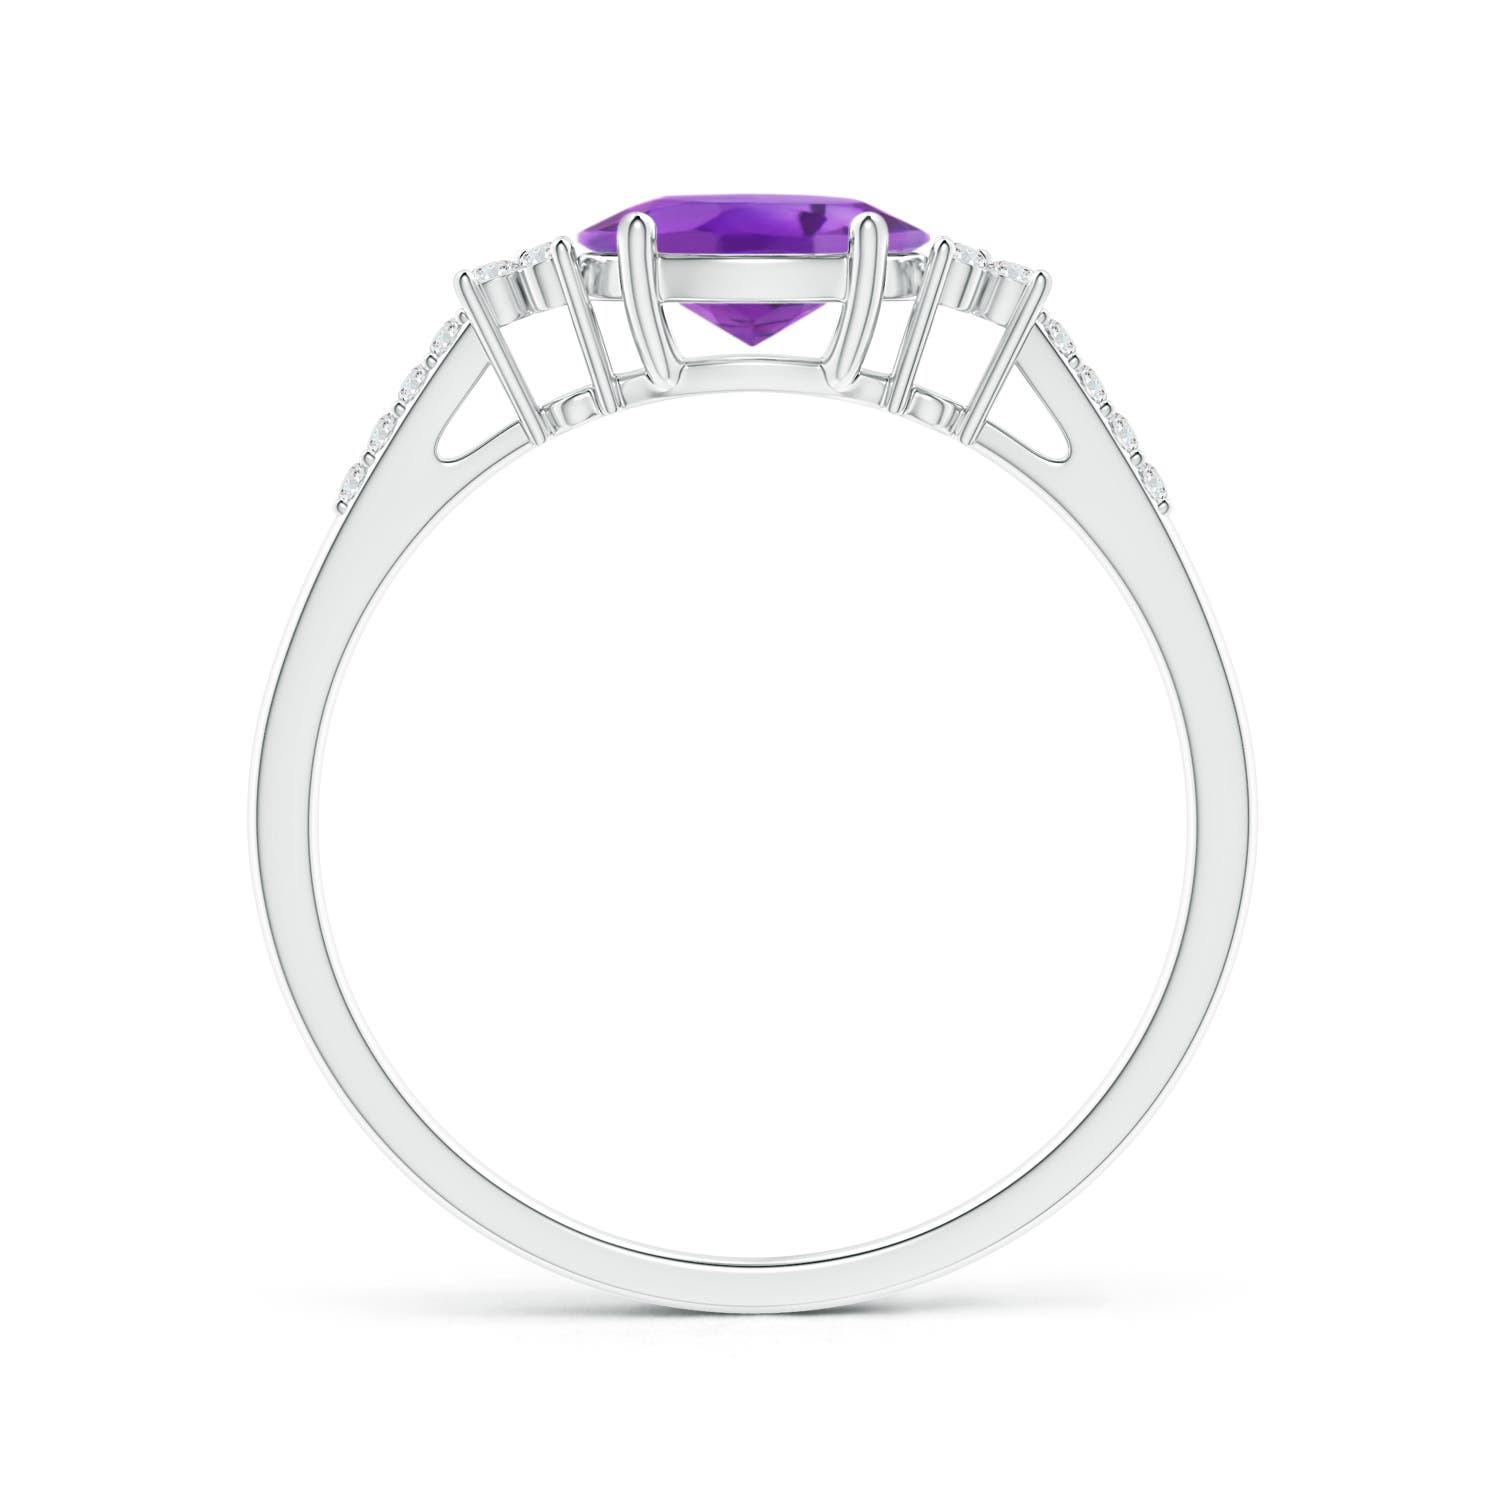 AA - Amethyst / 0.79 CT / 14 KT White Gold